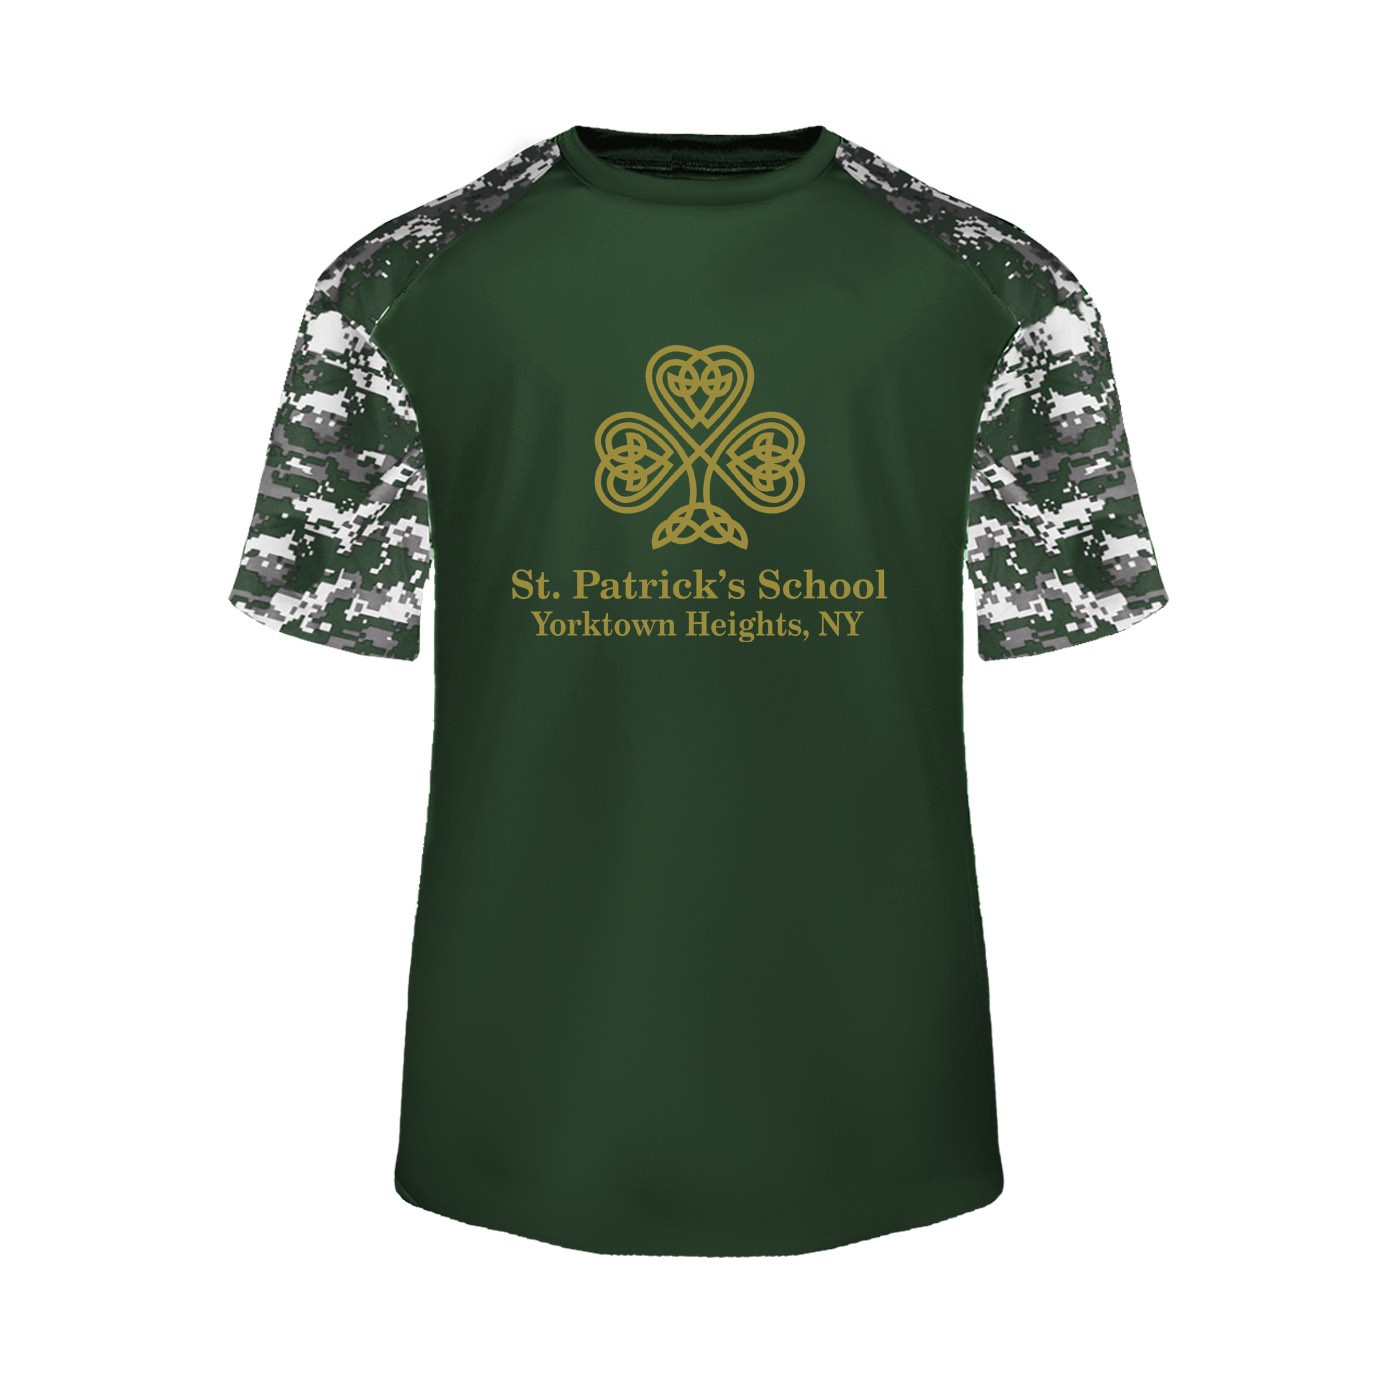 SPS Spirit S/S Digital Camo T-Shirt w/ Full Front Logo - Please Allow 2-3 Weeks for Delivery